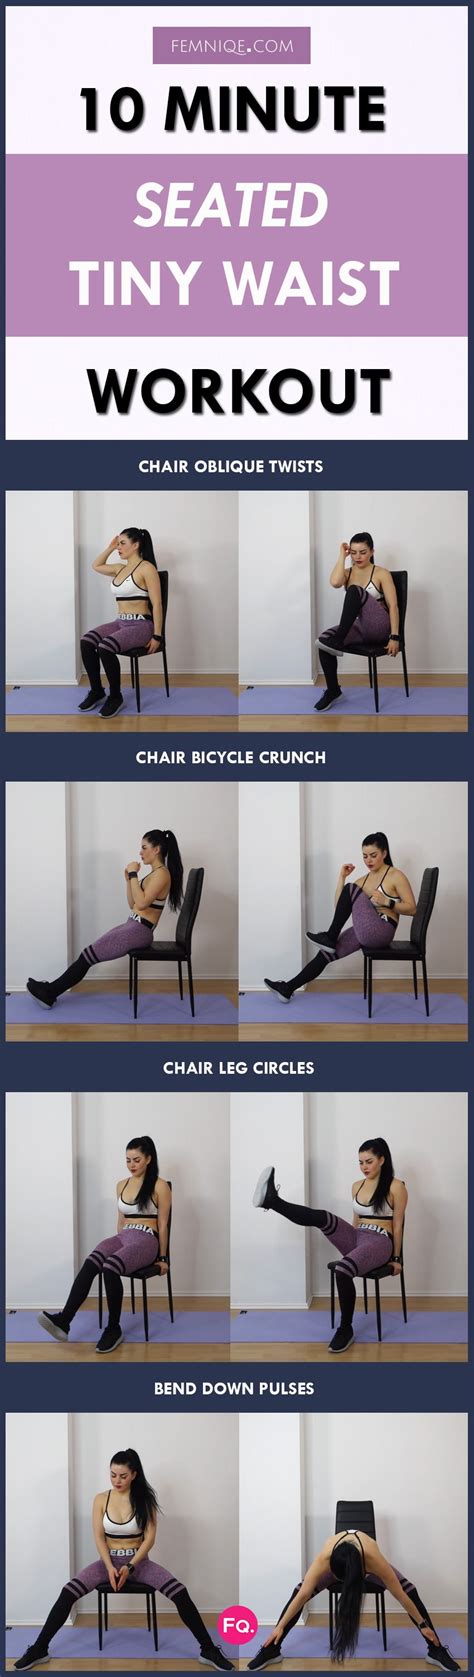 How To Get A Slim Waist And Flat Stomach 10 Minute Seated Workout With